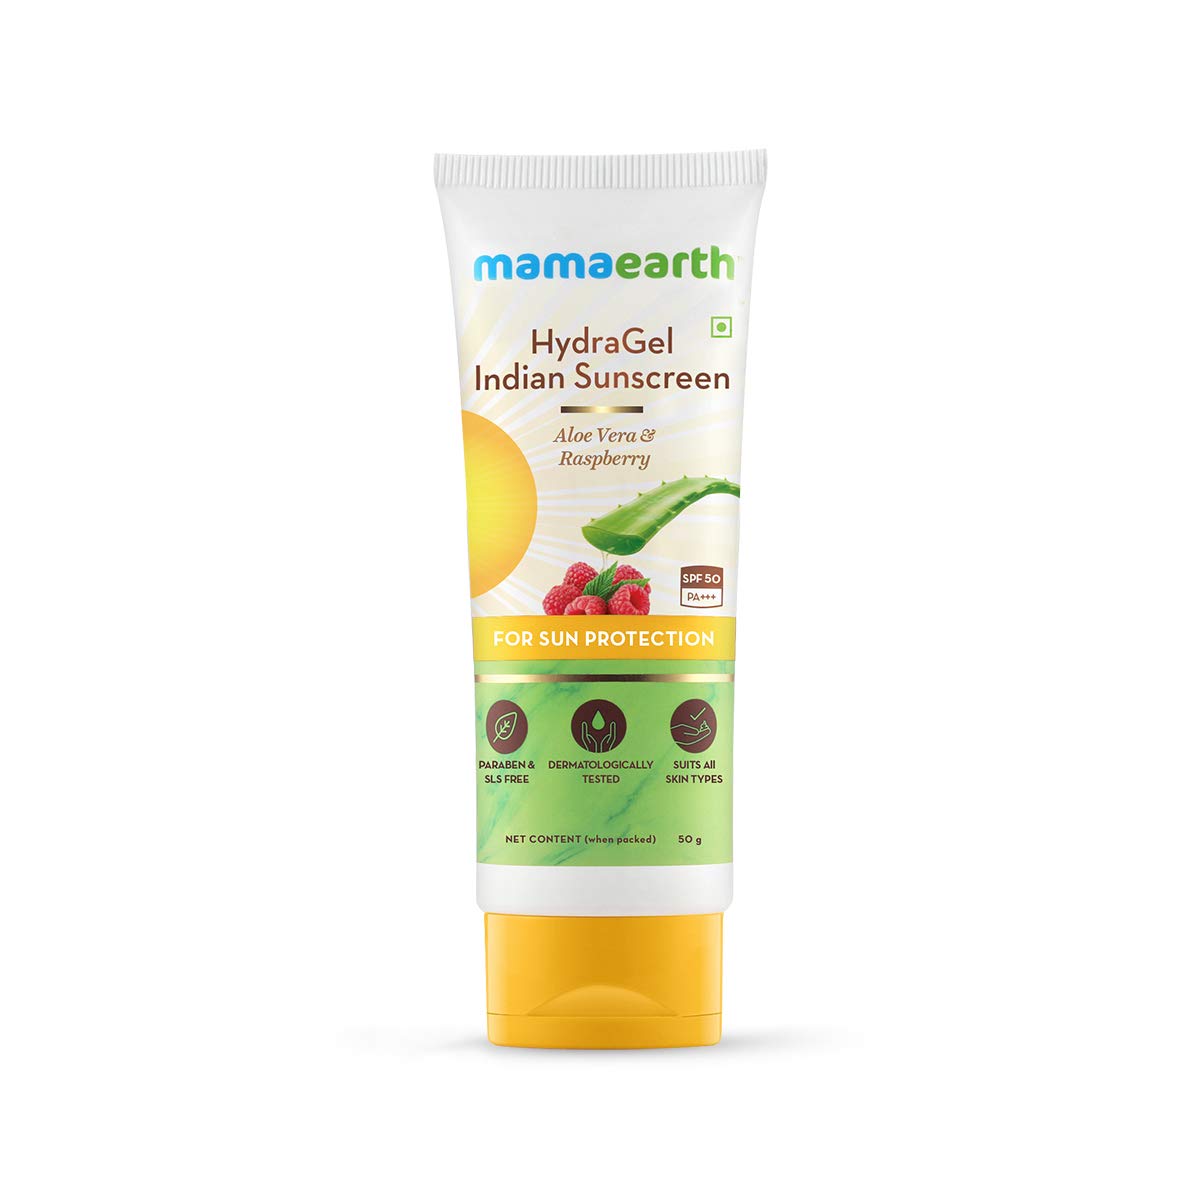 Mama Earth HydraGel Indian Sunscreen with Aloe Vera and Raspberry for Sun Protection, 50g